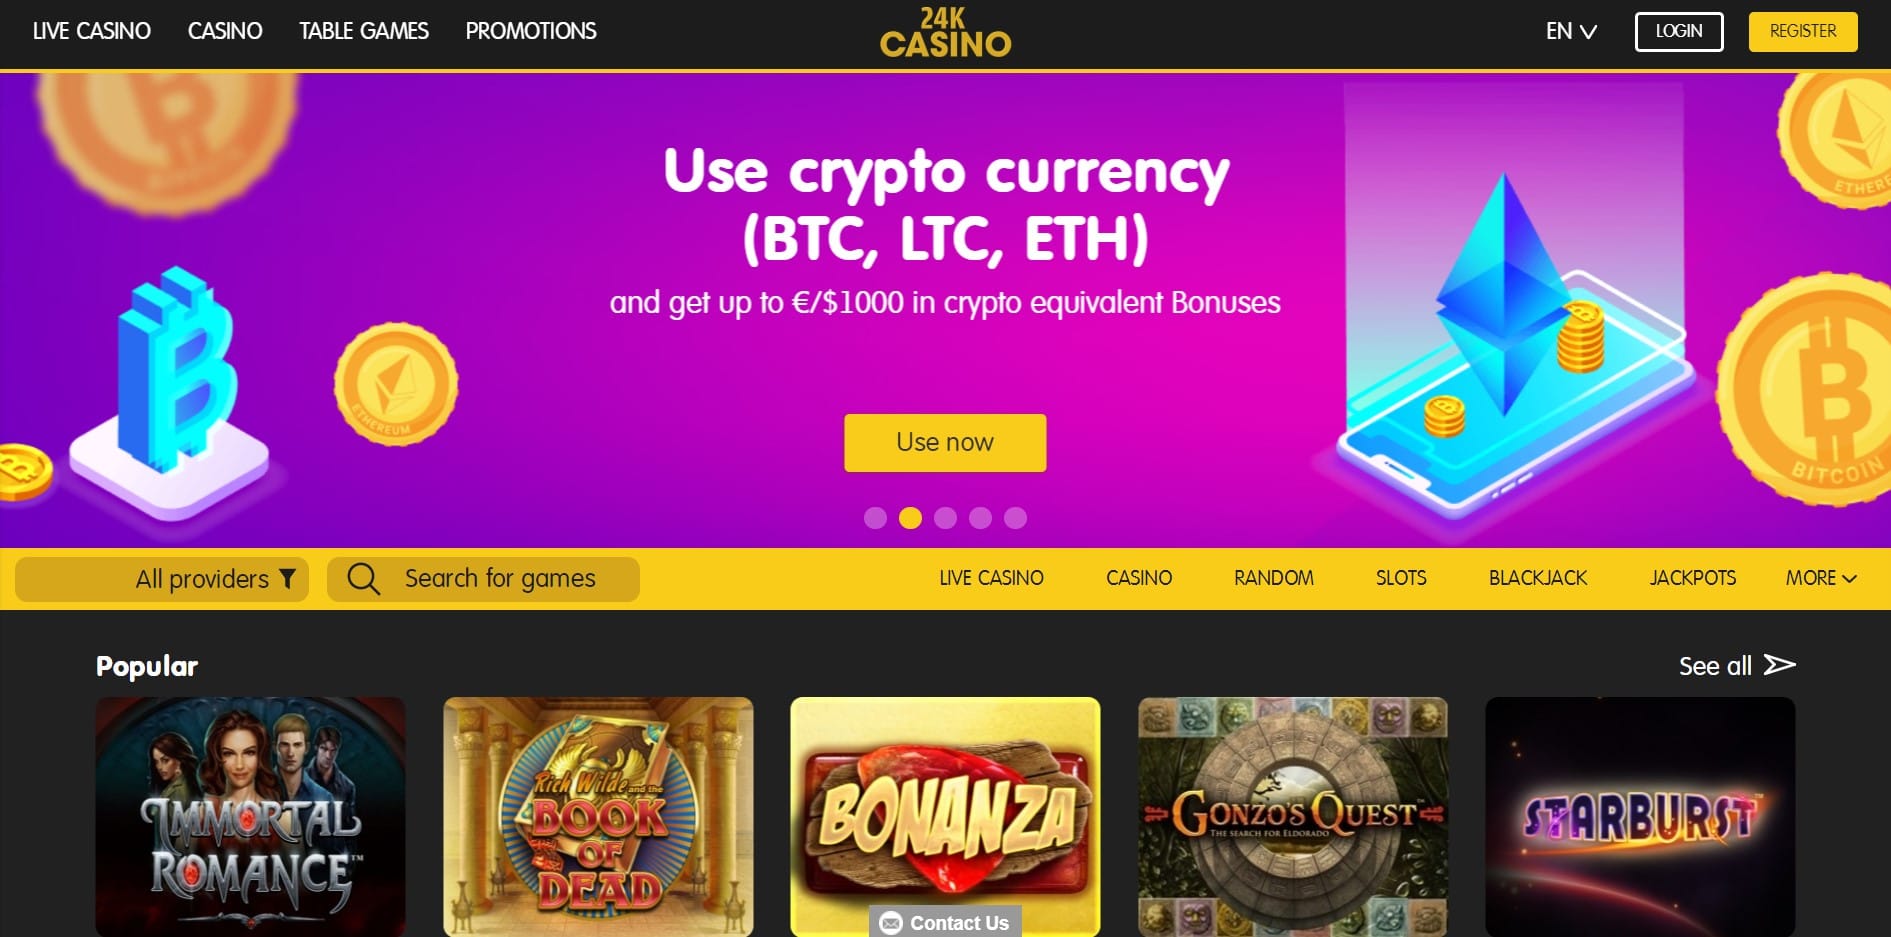 24K Casino Review